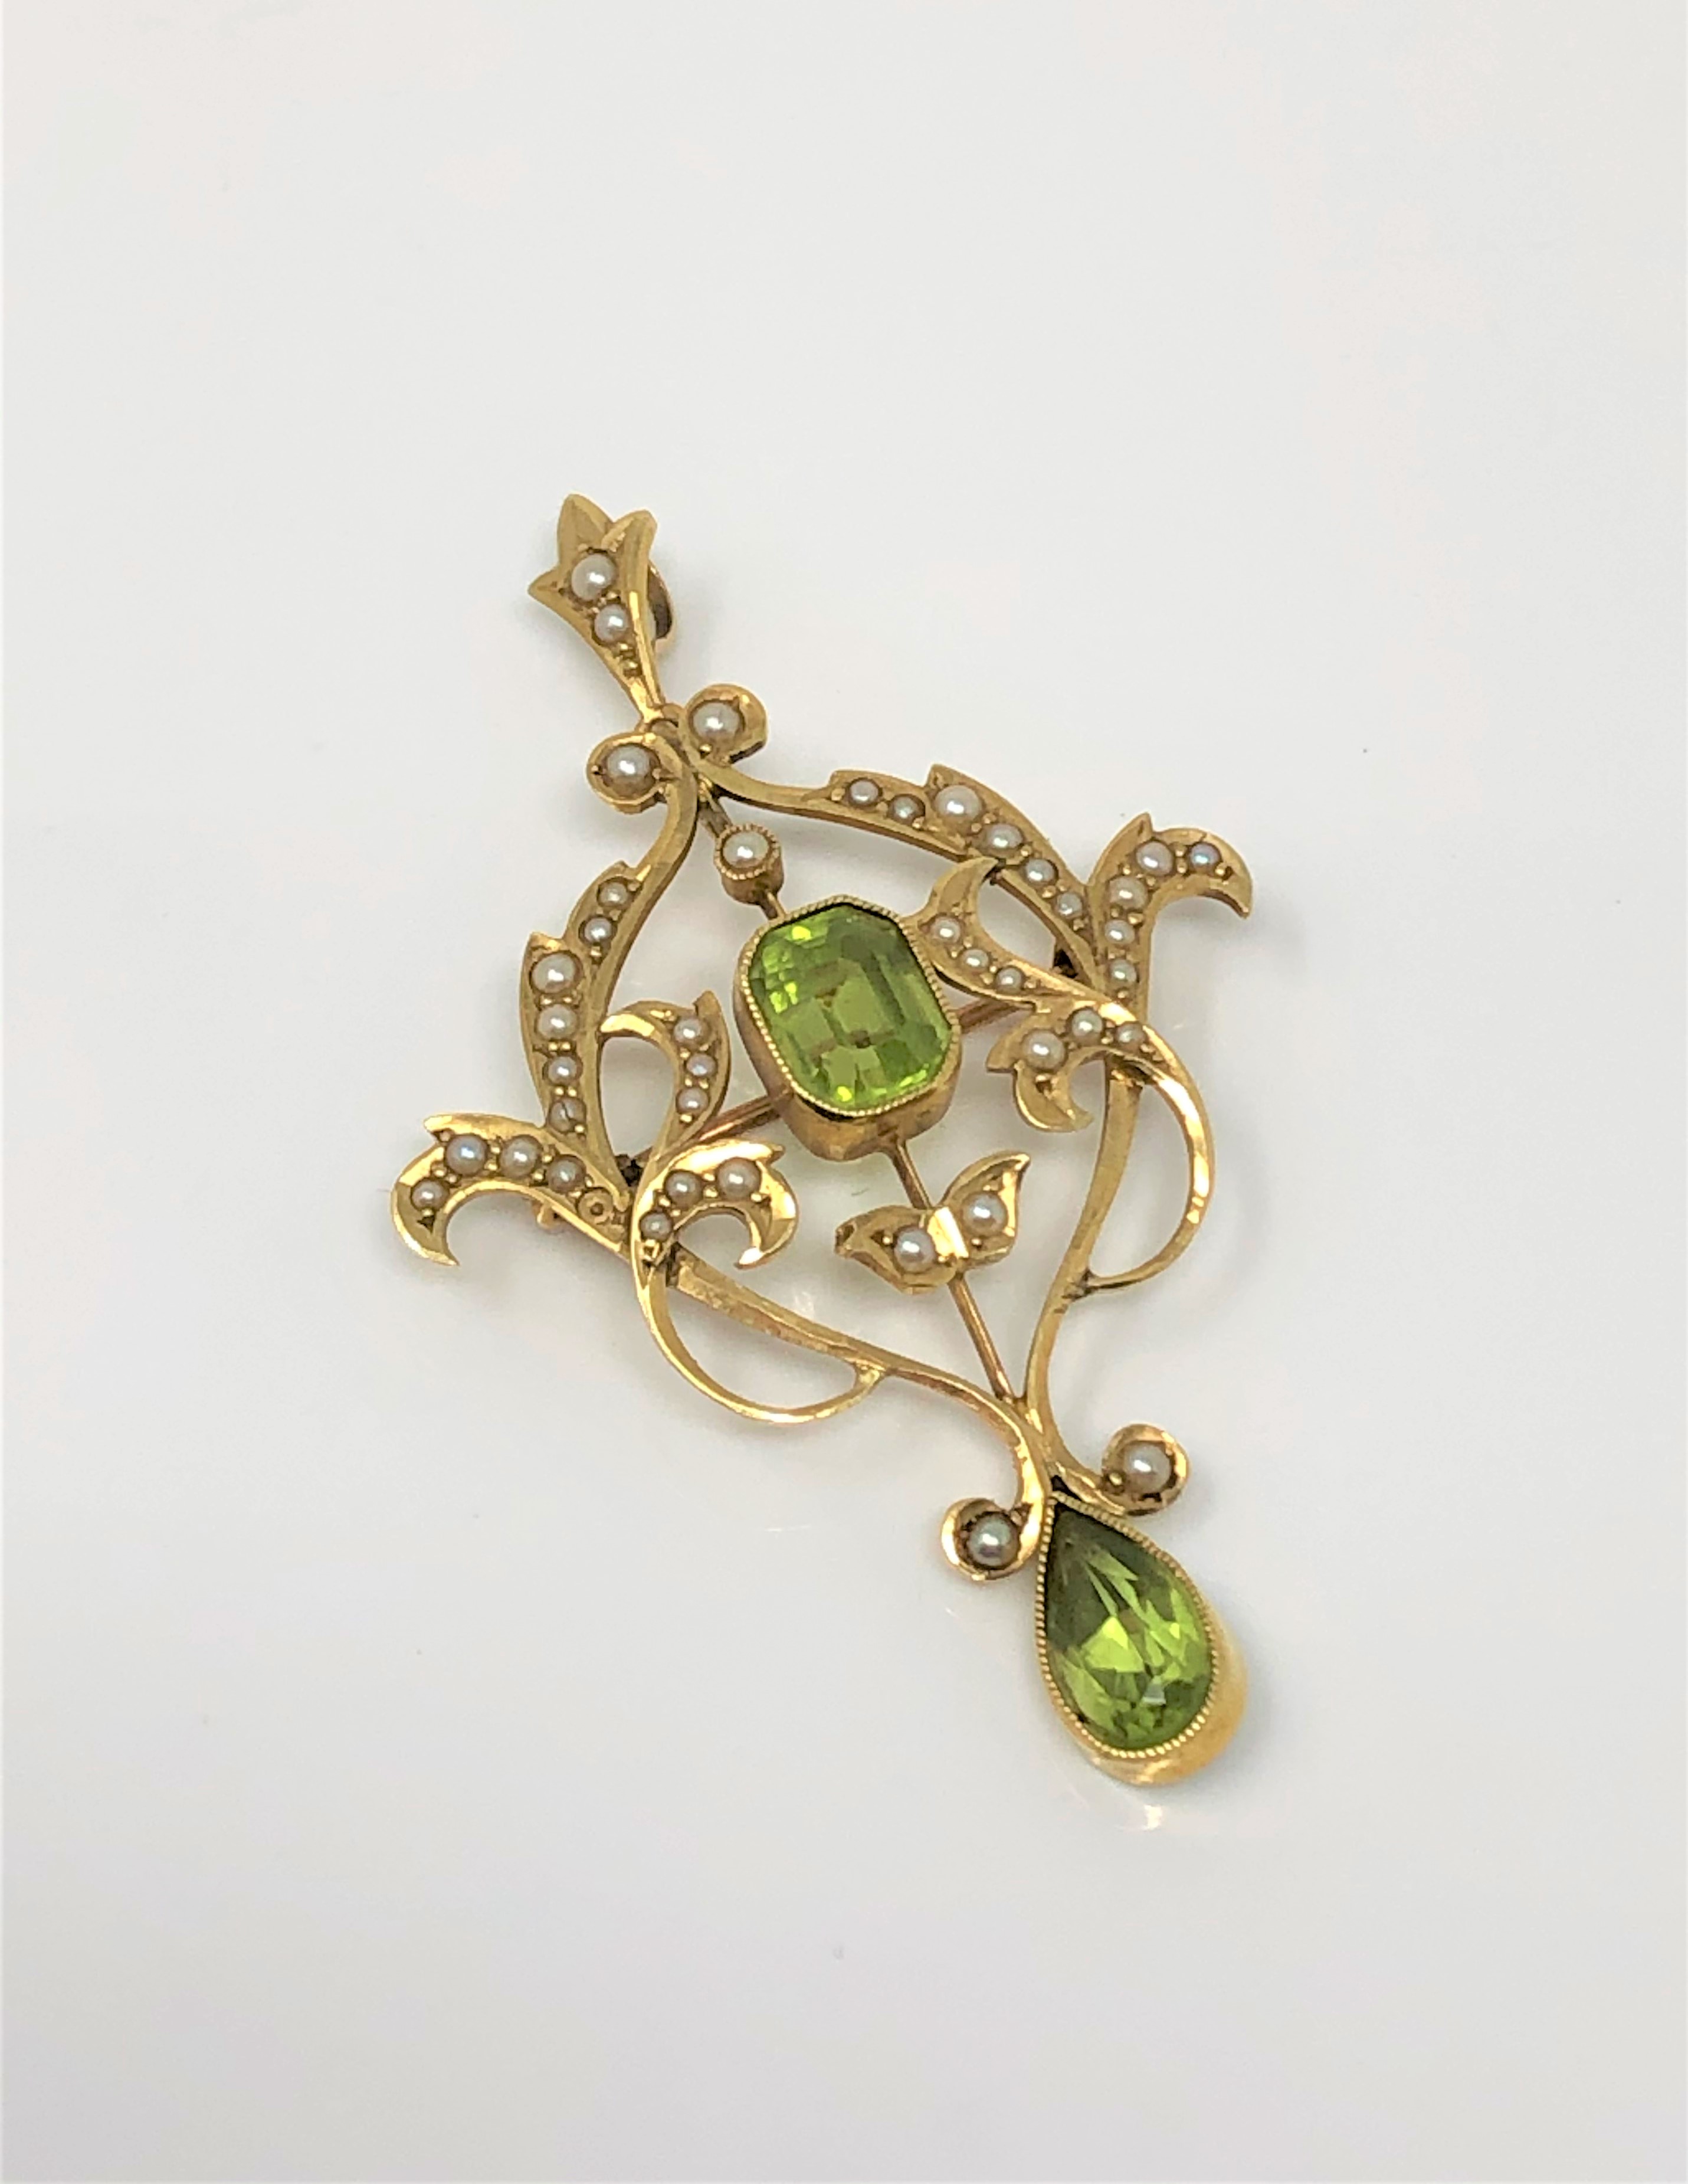 An Edwardian 15ct gold peridot and seed pearl pendant,